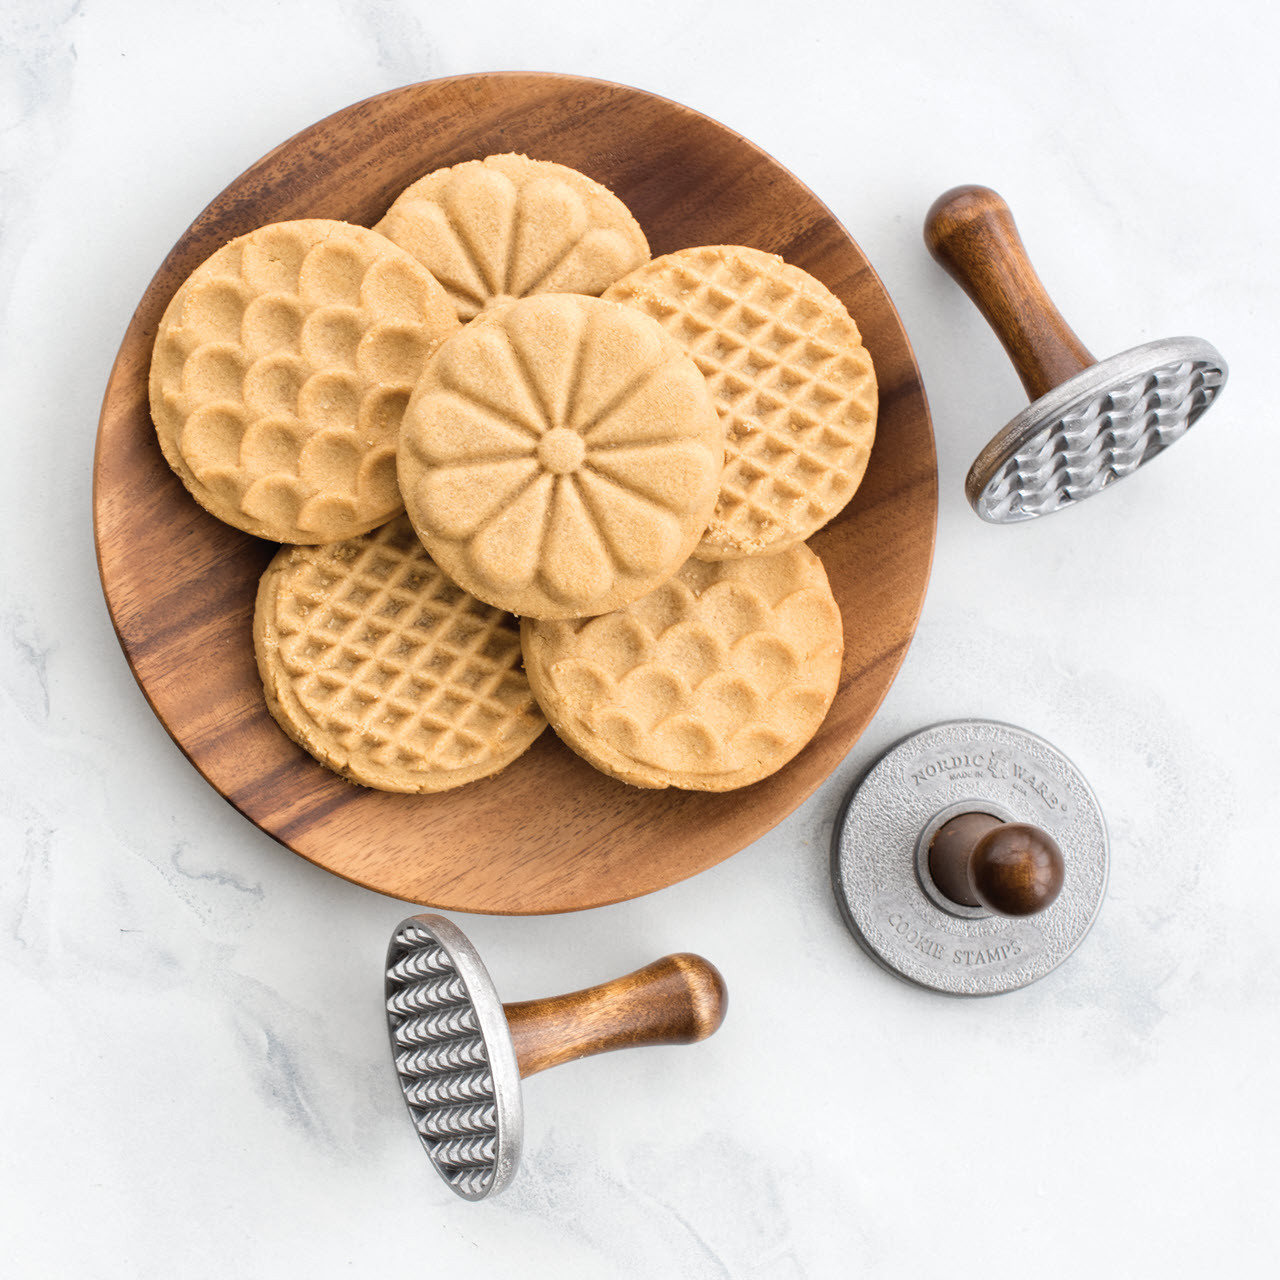 https://cdn11.bigcommerce.com/s-21kj3ntgv1/images/stencil/1280x1280/products/466/1608/Nordic-Ware-Heirloom-Cookie-Stamps-with-cookies-__39771.1658092641.jpg?c=2